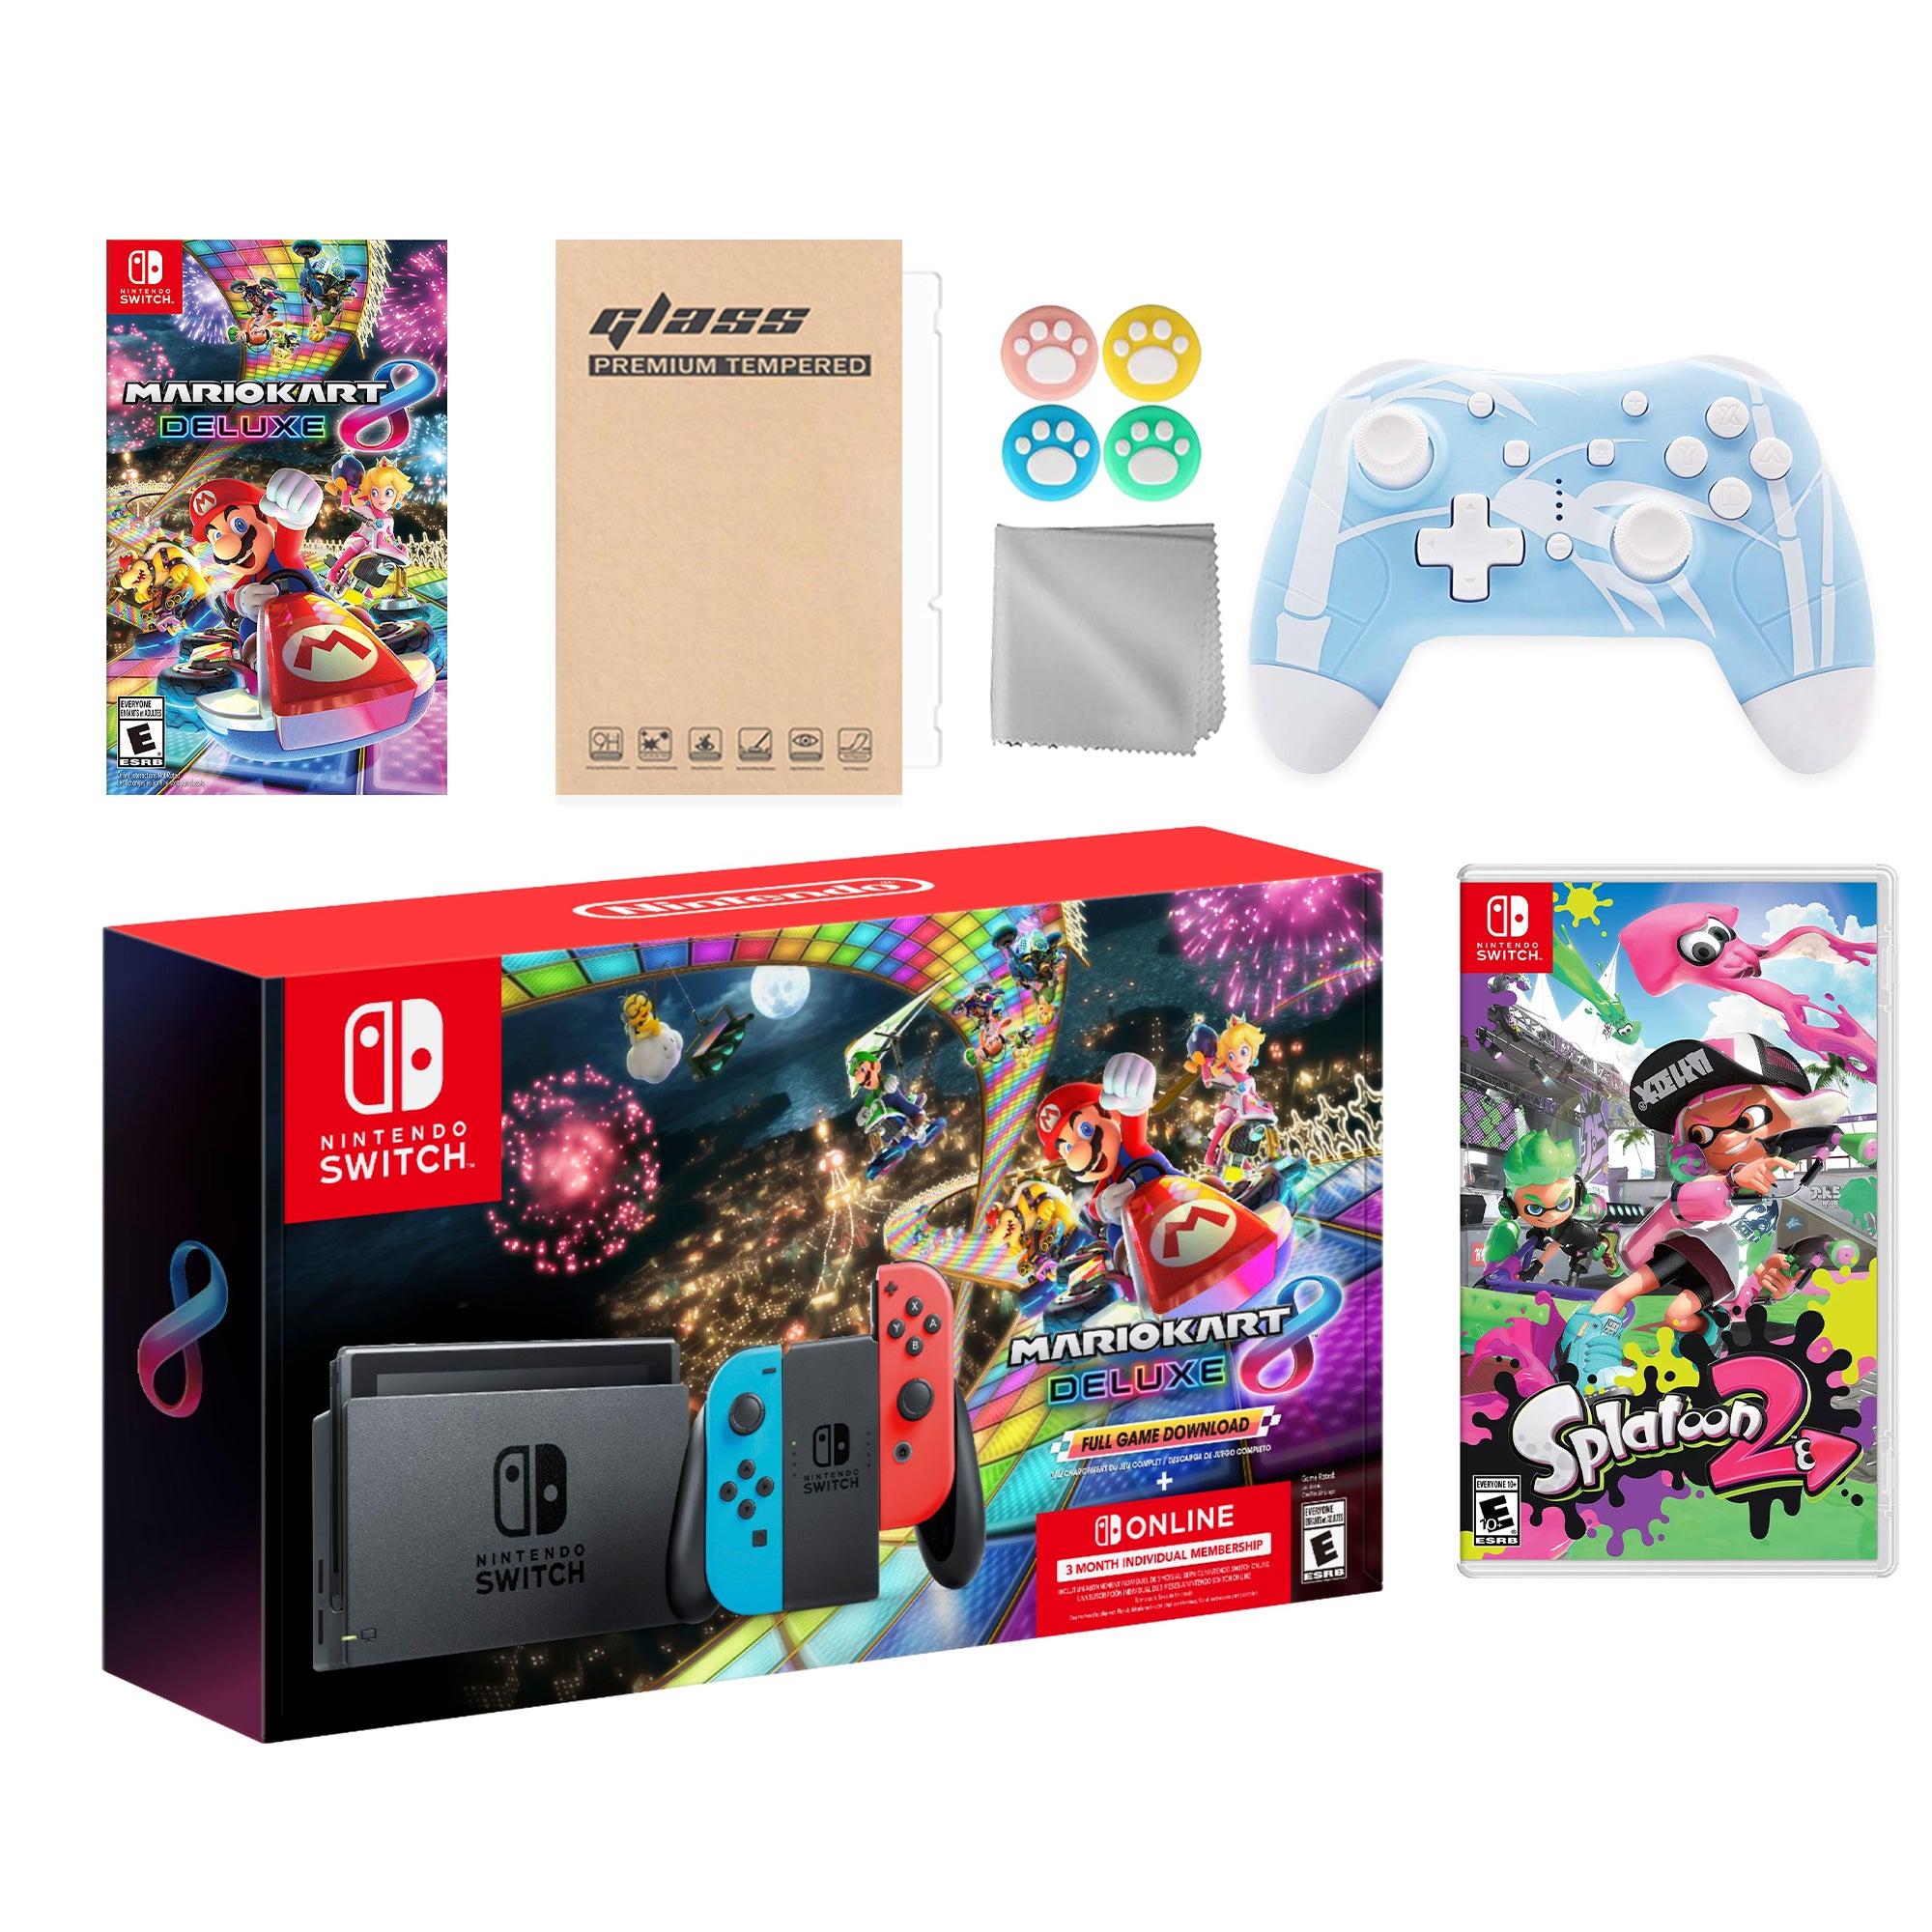 Nintendo Switch Mario Kart 8 Deluxe Bundle: Red Blue Console, Mario Kart 8 & Membership, Splatoon 2, Mytrix Wireless Pro Controller Blue Bamboo and Accessories